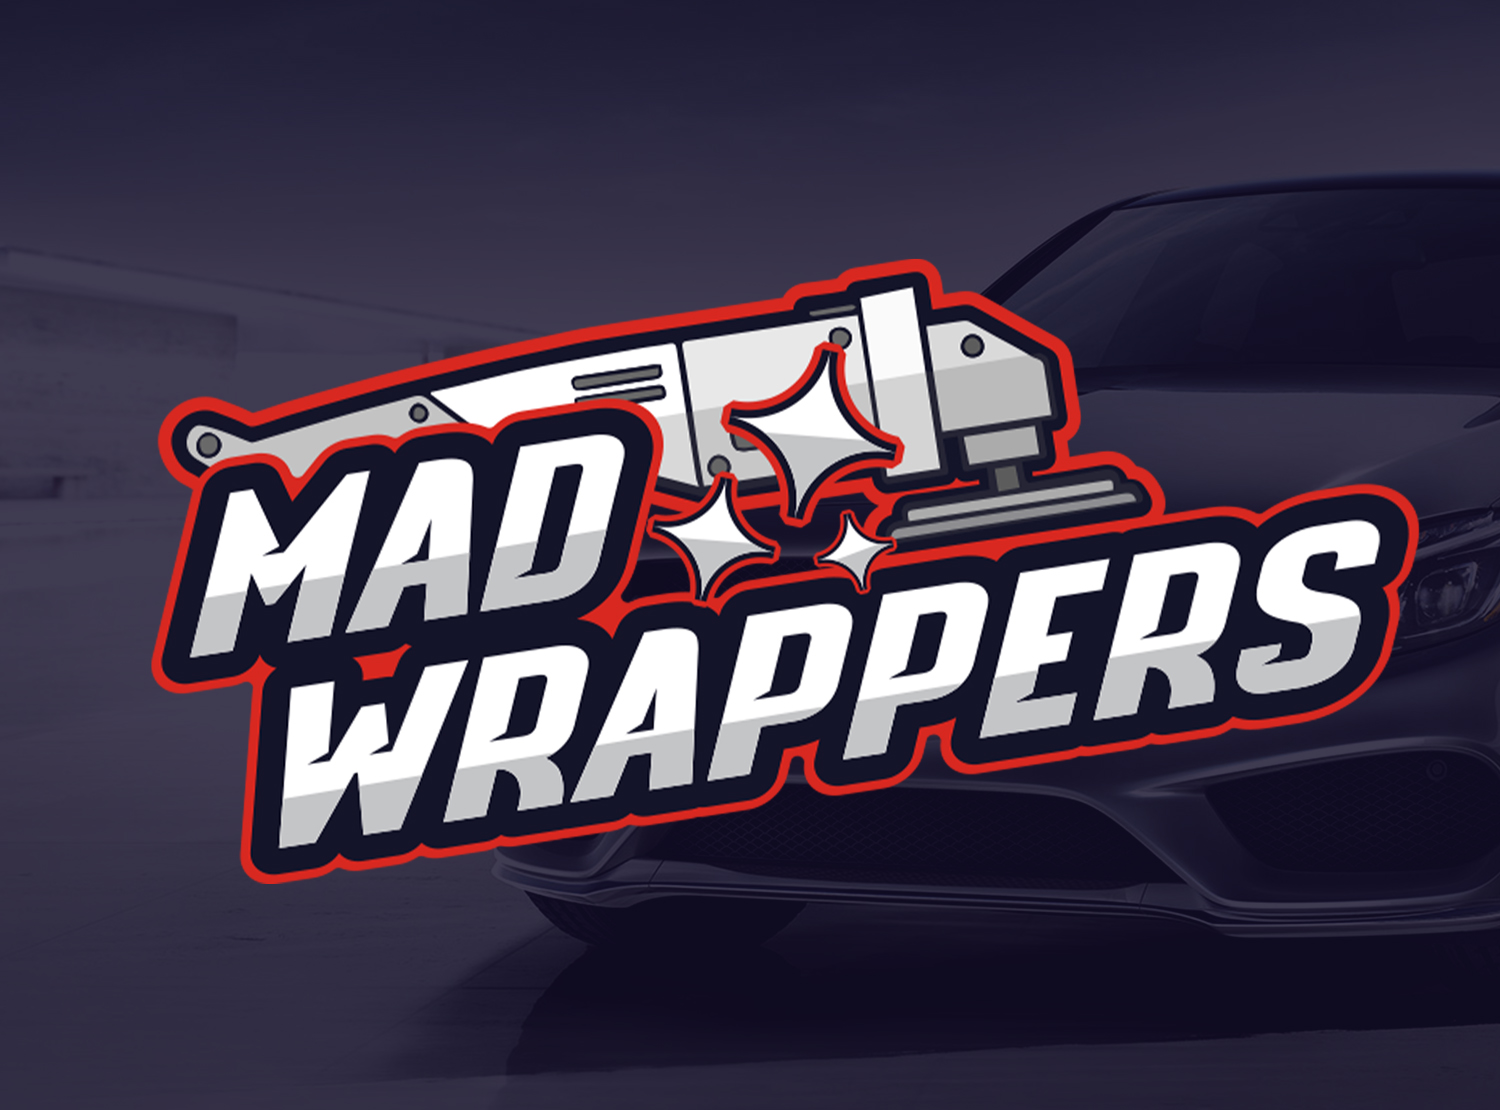 Mad works. Mad wrappers. Работа в Мад.